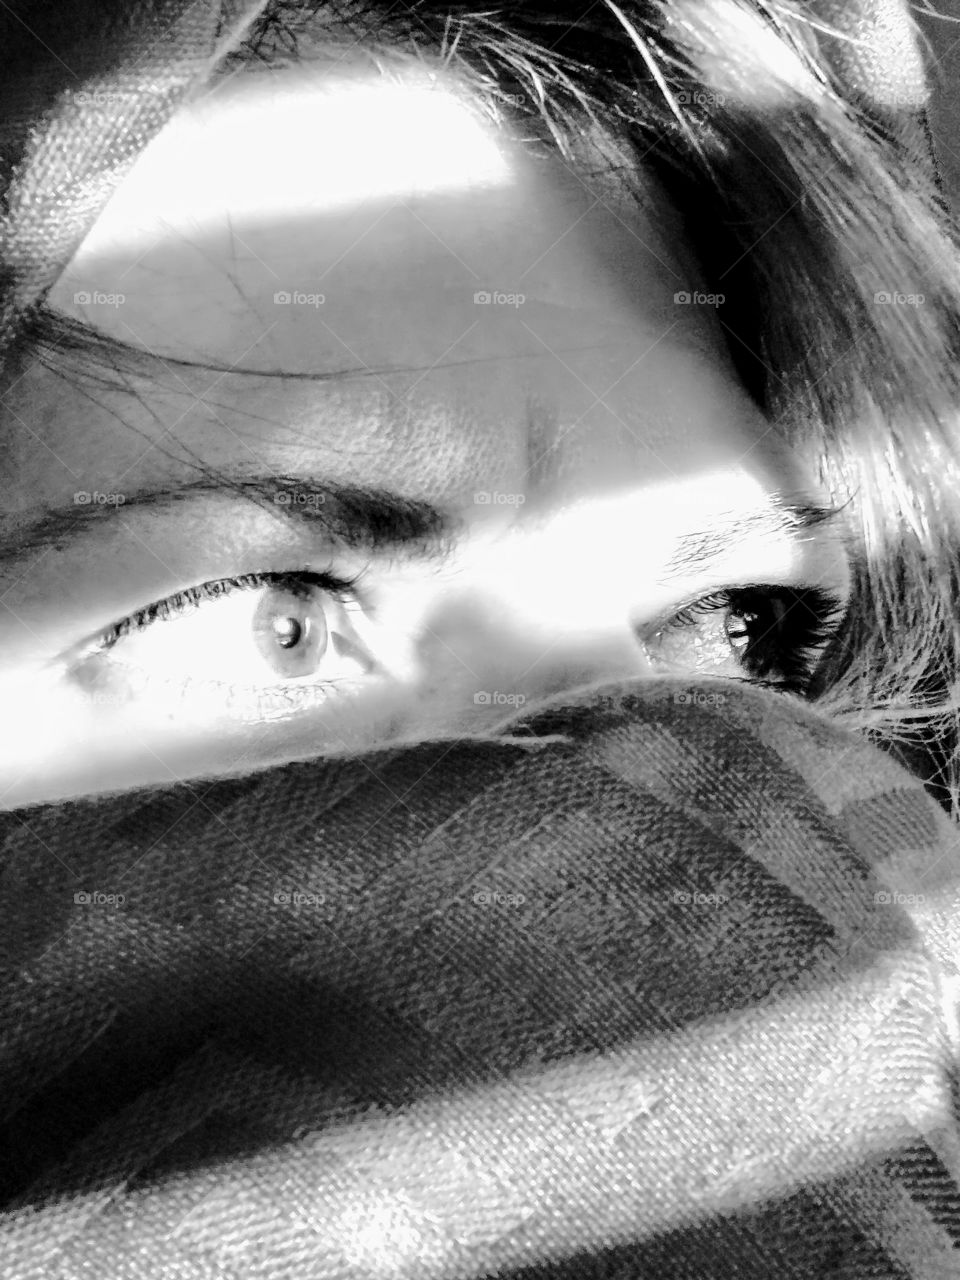 Sunlight and shadows on a face partially covered by a scarf